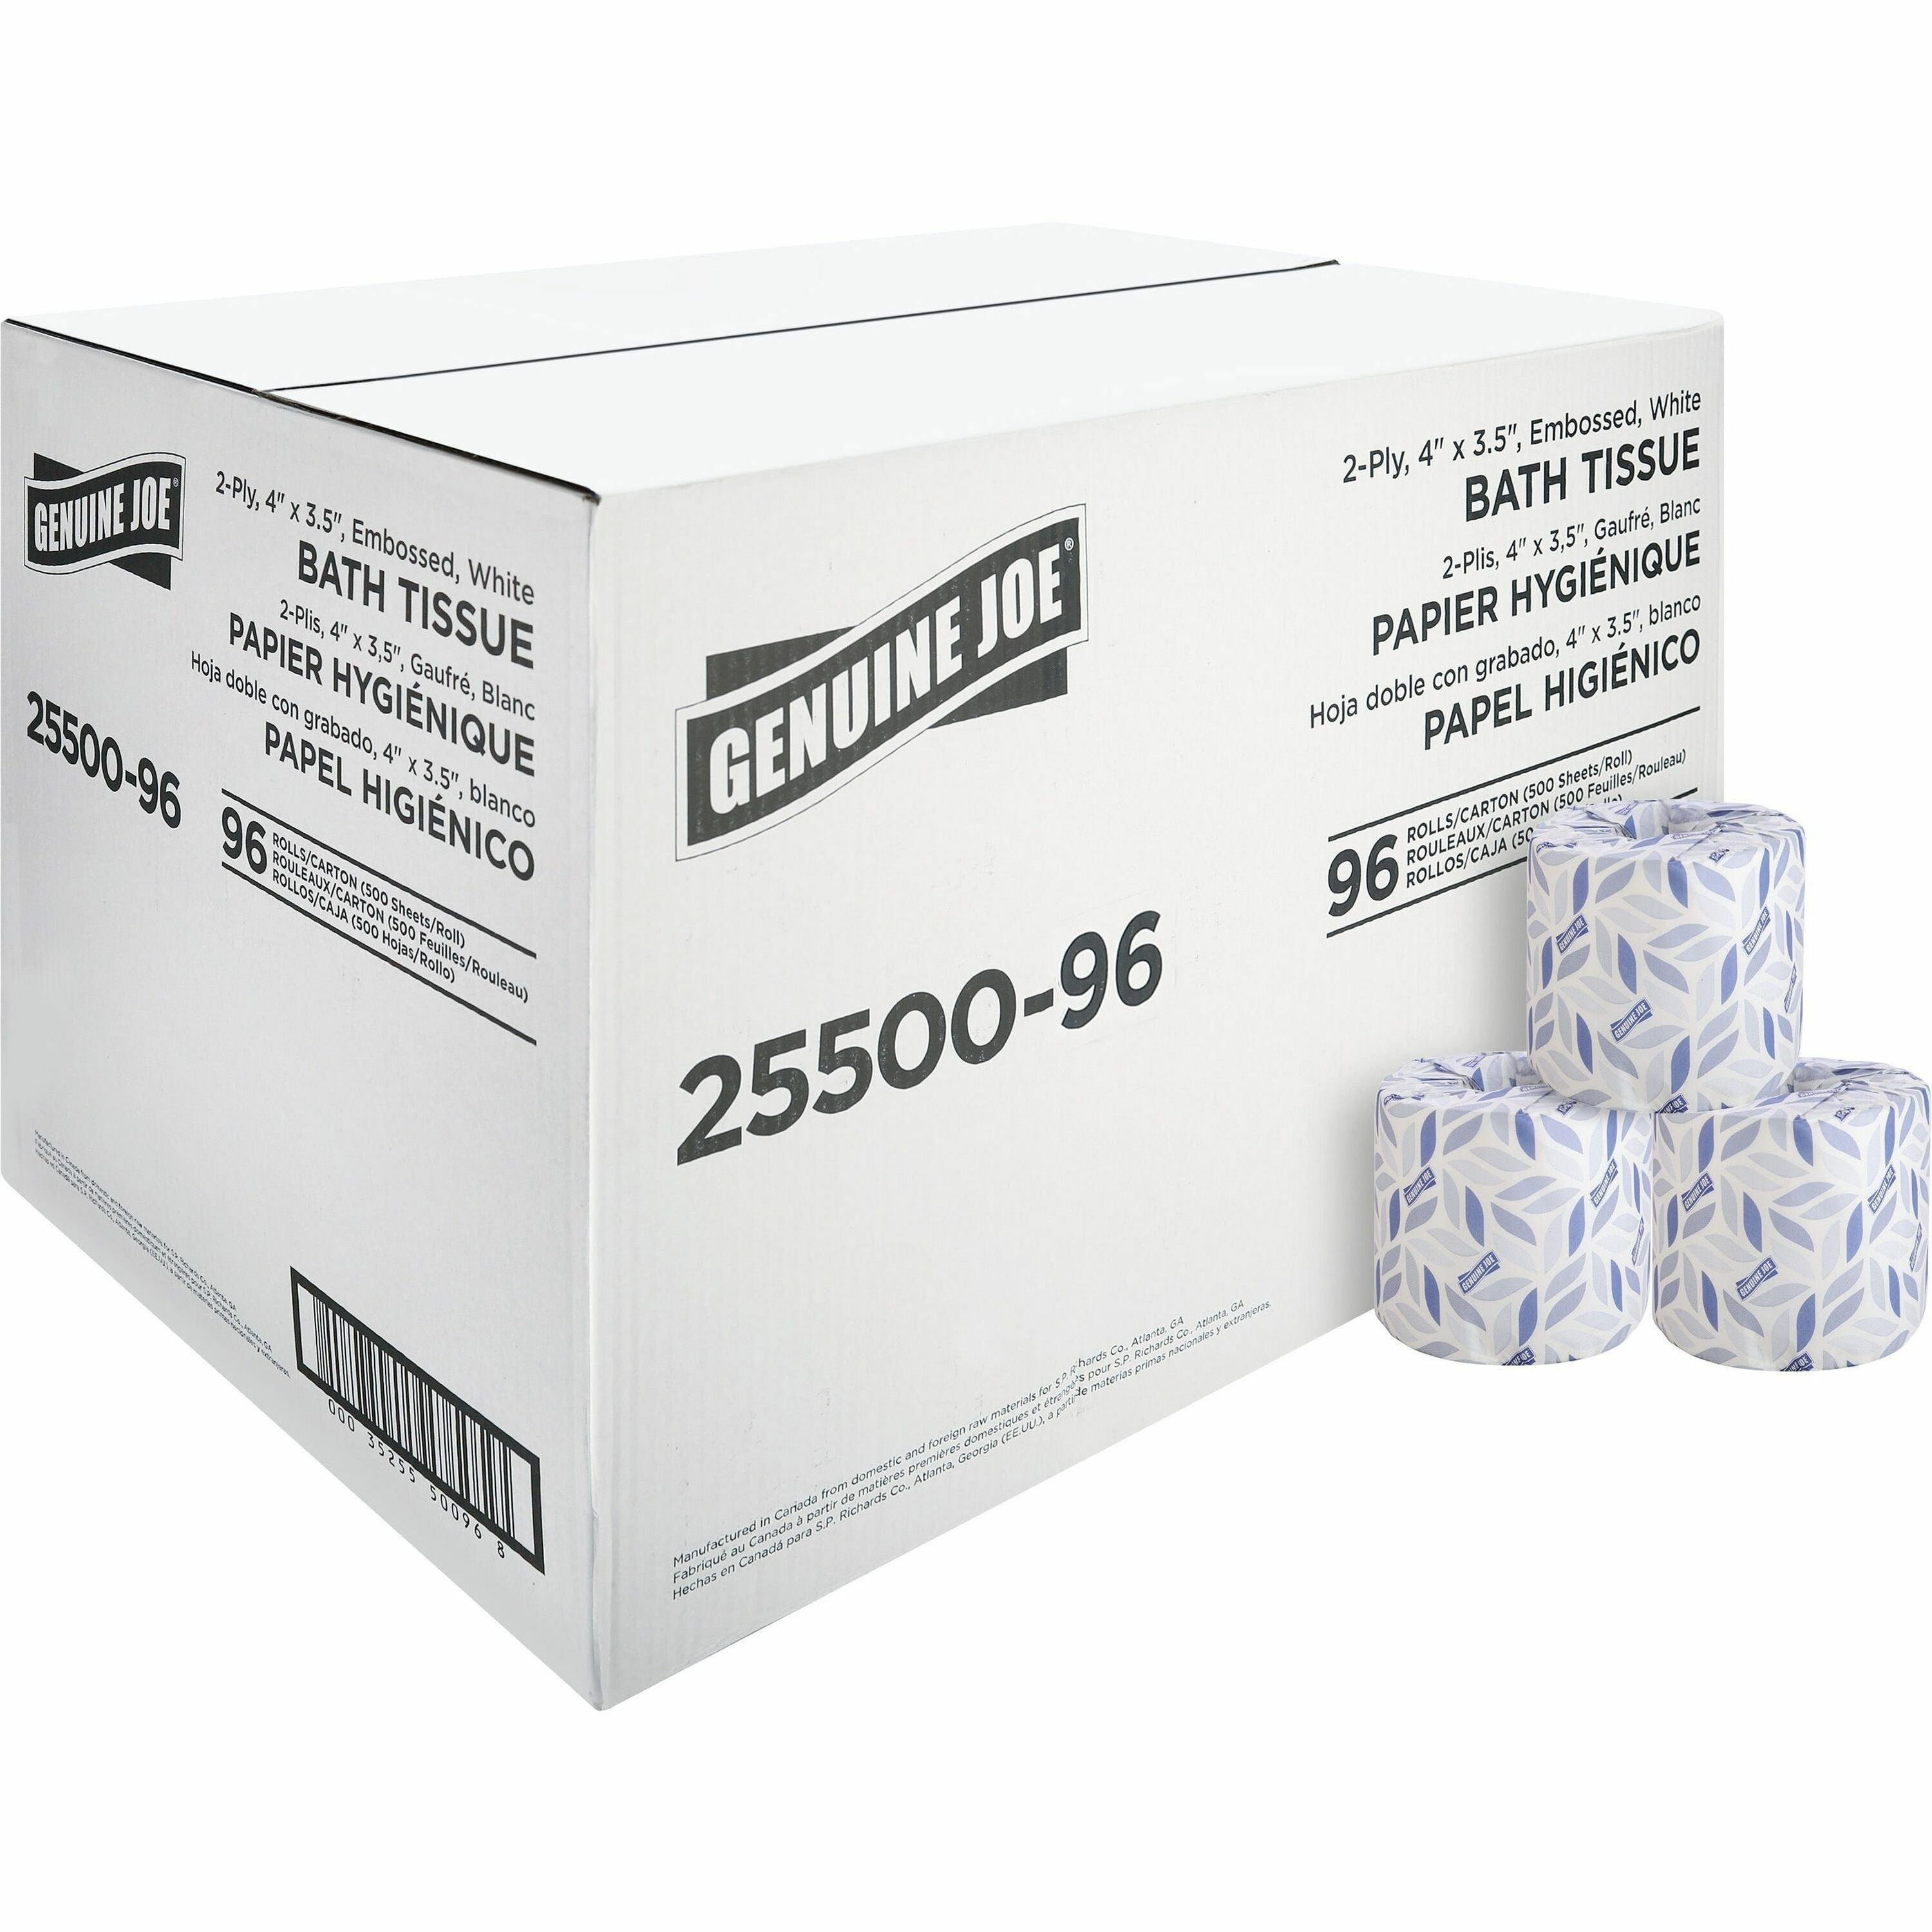 genuine-joe-2-ply-standard-bath-tissue-rolls-2-ply-4-x-320-500-sheets-roll-163-core-white-perforated-absorbent-soft-96-carton_gjo2550096 - 1